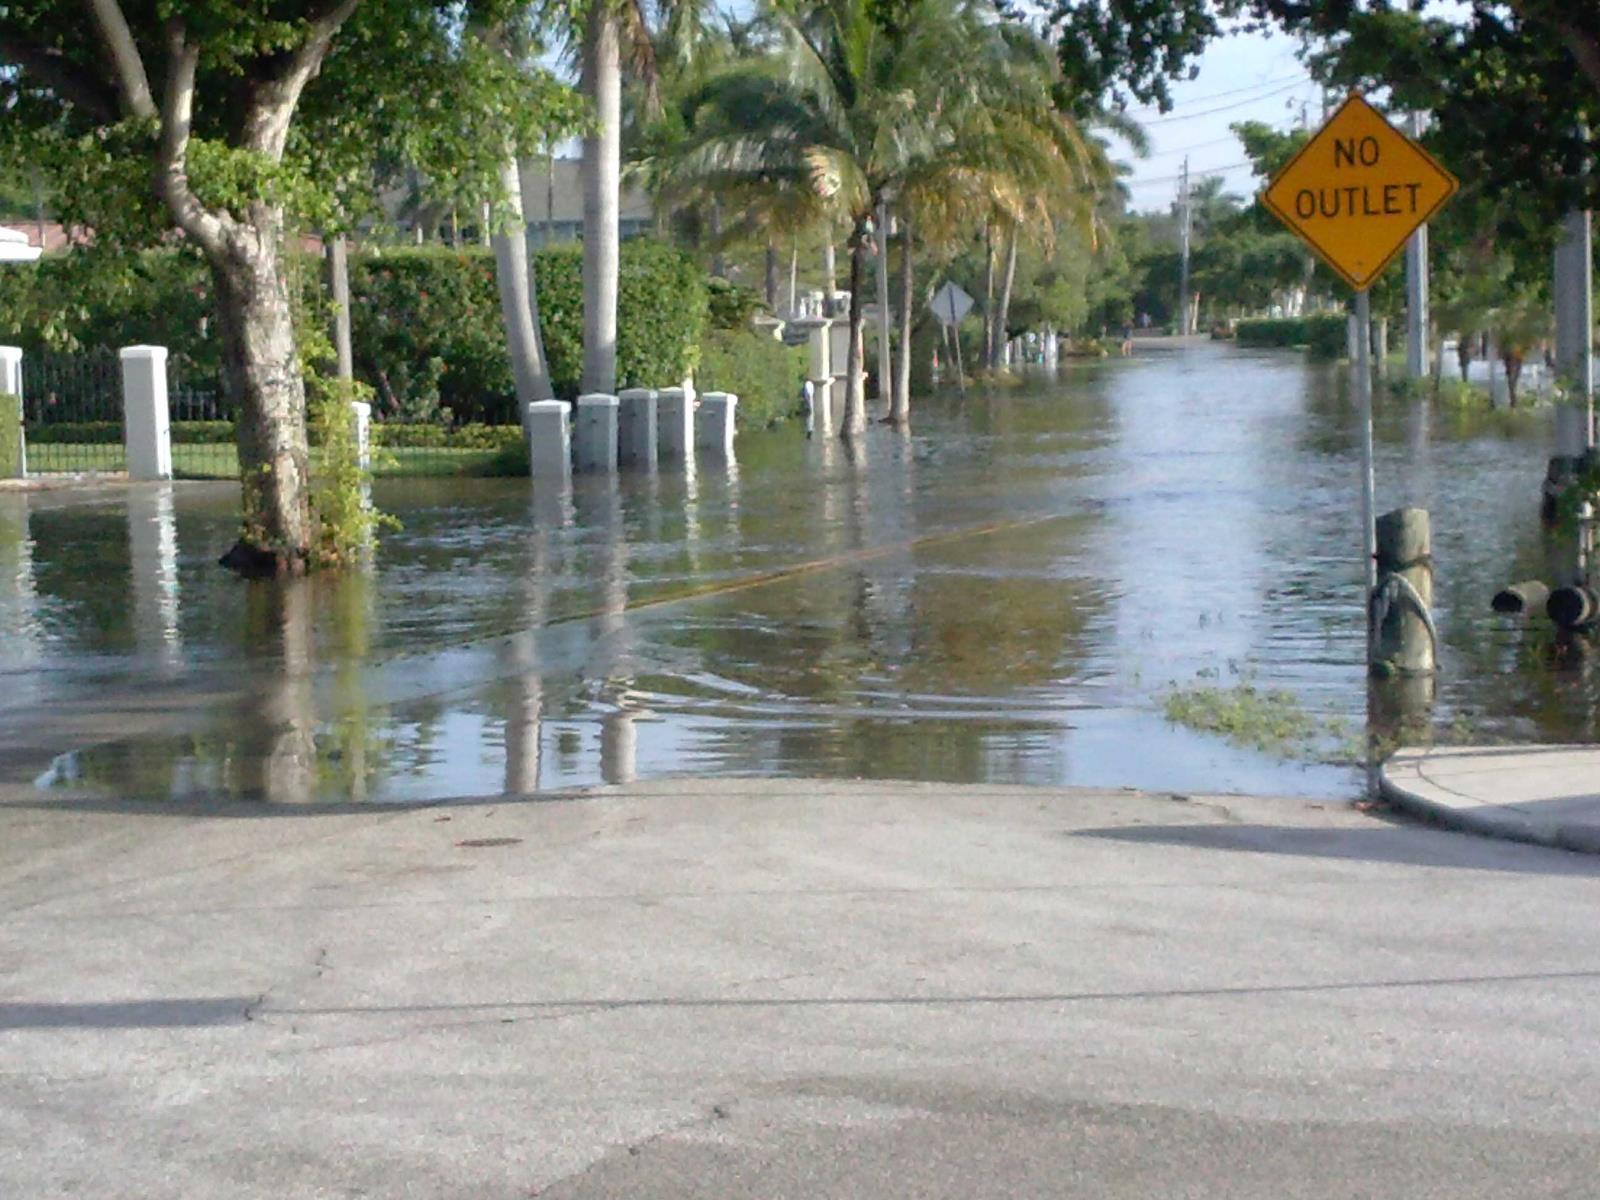 King Tides and High Tides in Fort Lauderdale